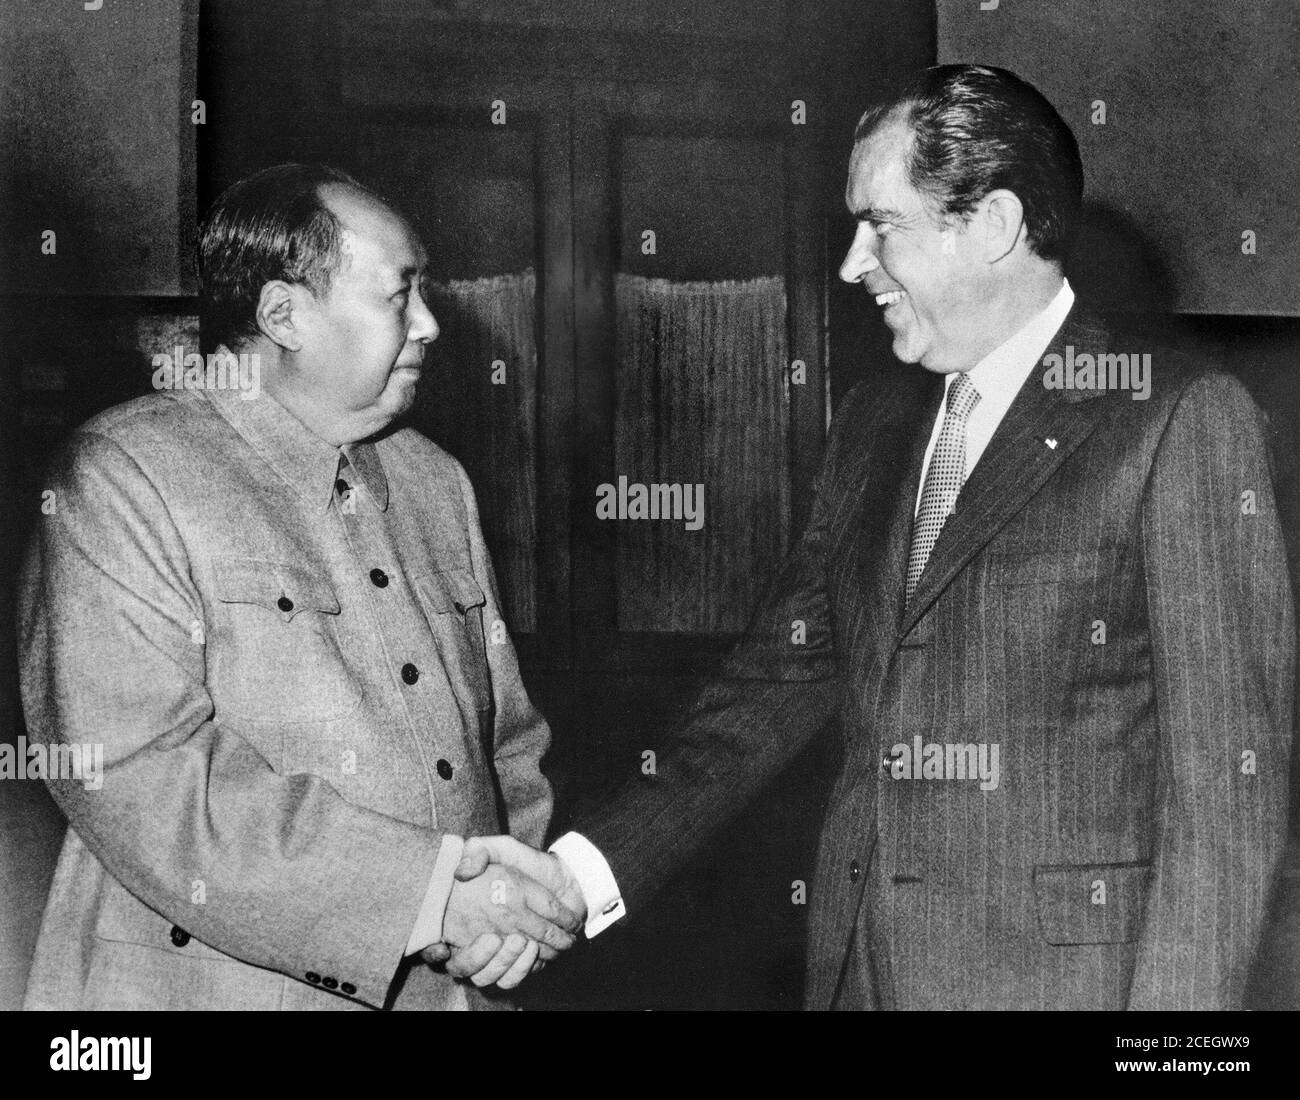 Mao and Nixon. US President Richard Nixon shaking hands with Chinese communist party chairman Mao Zedong. The photo was taken during Nixon's historic trip to China in 1972. Stock Photo